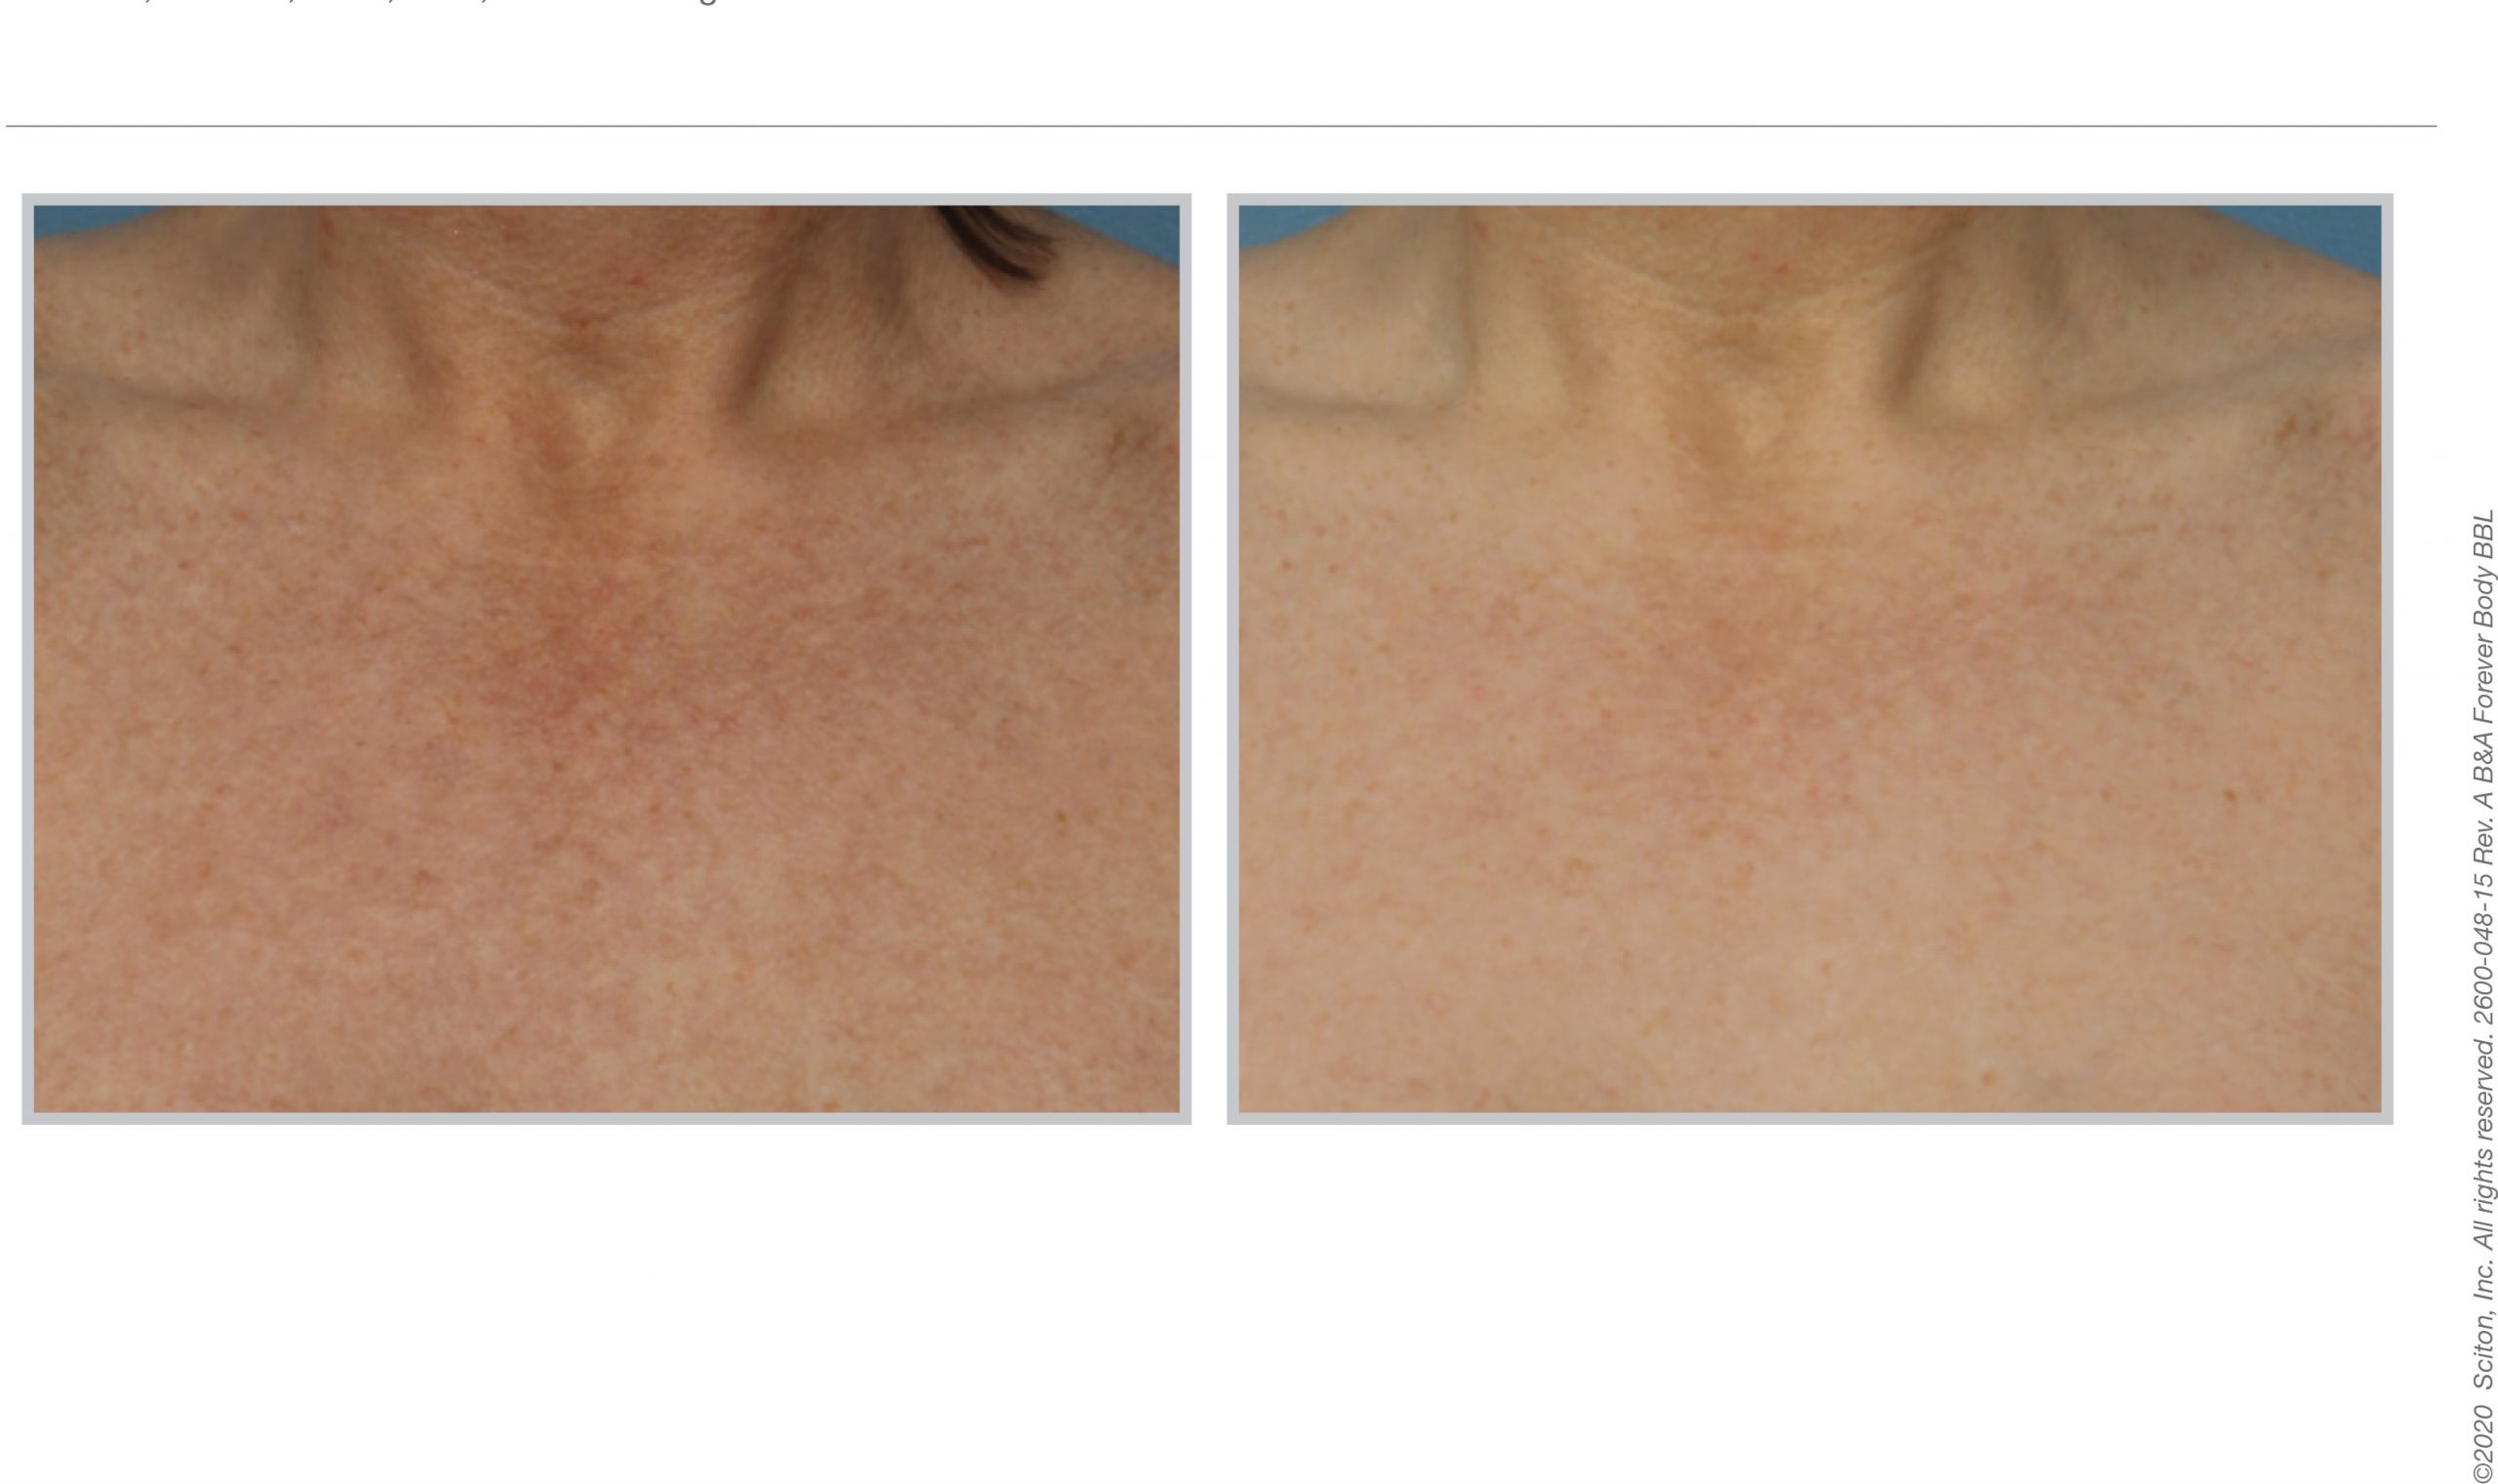 Patient before and after BBL Hero décolletage treatment 07